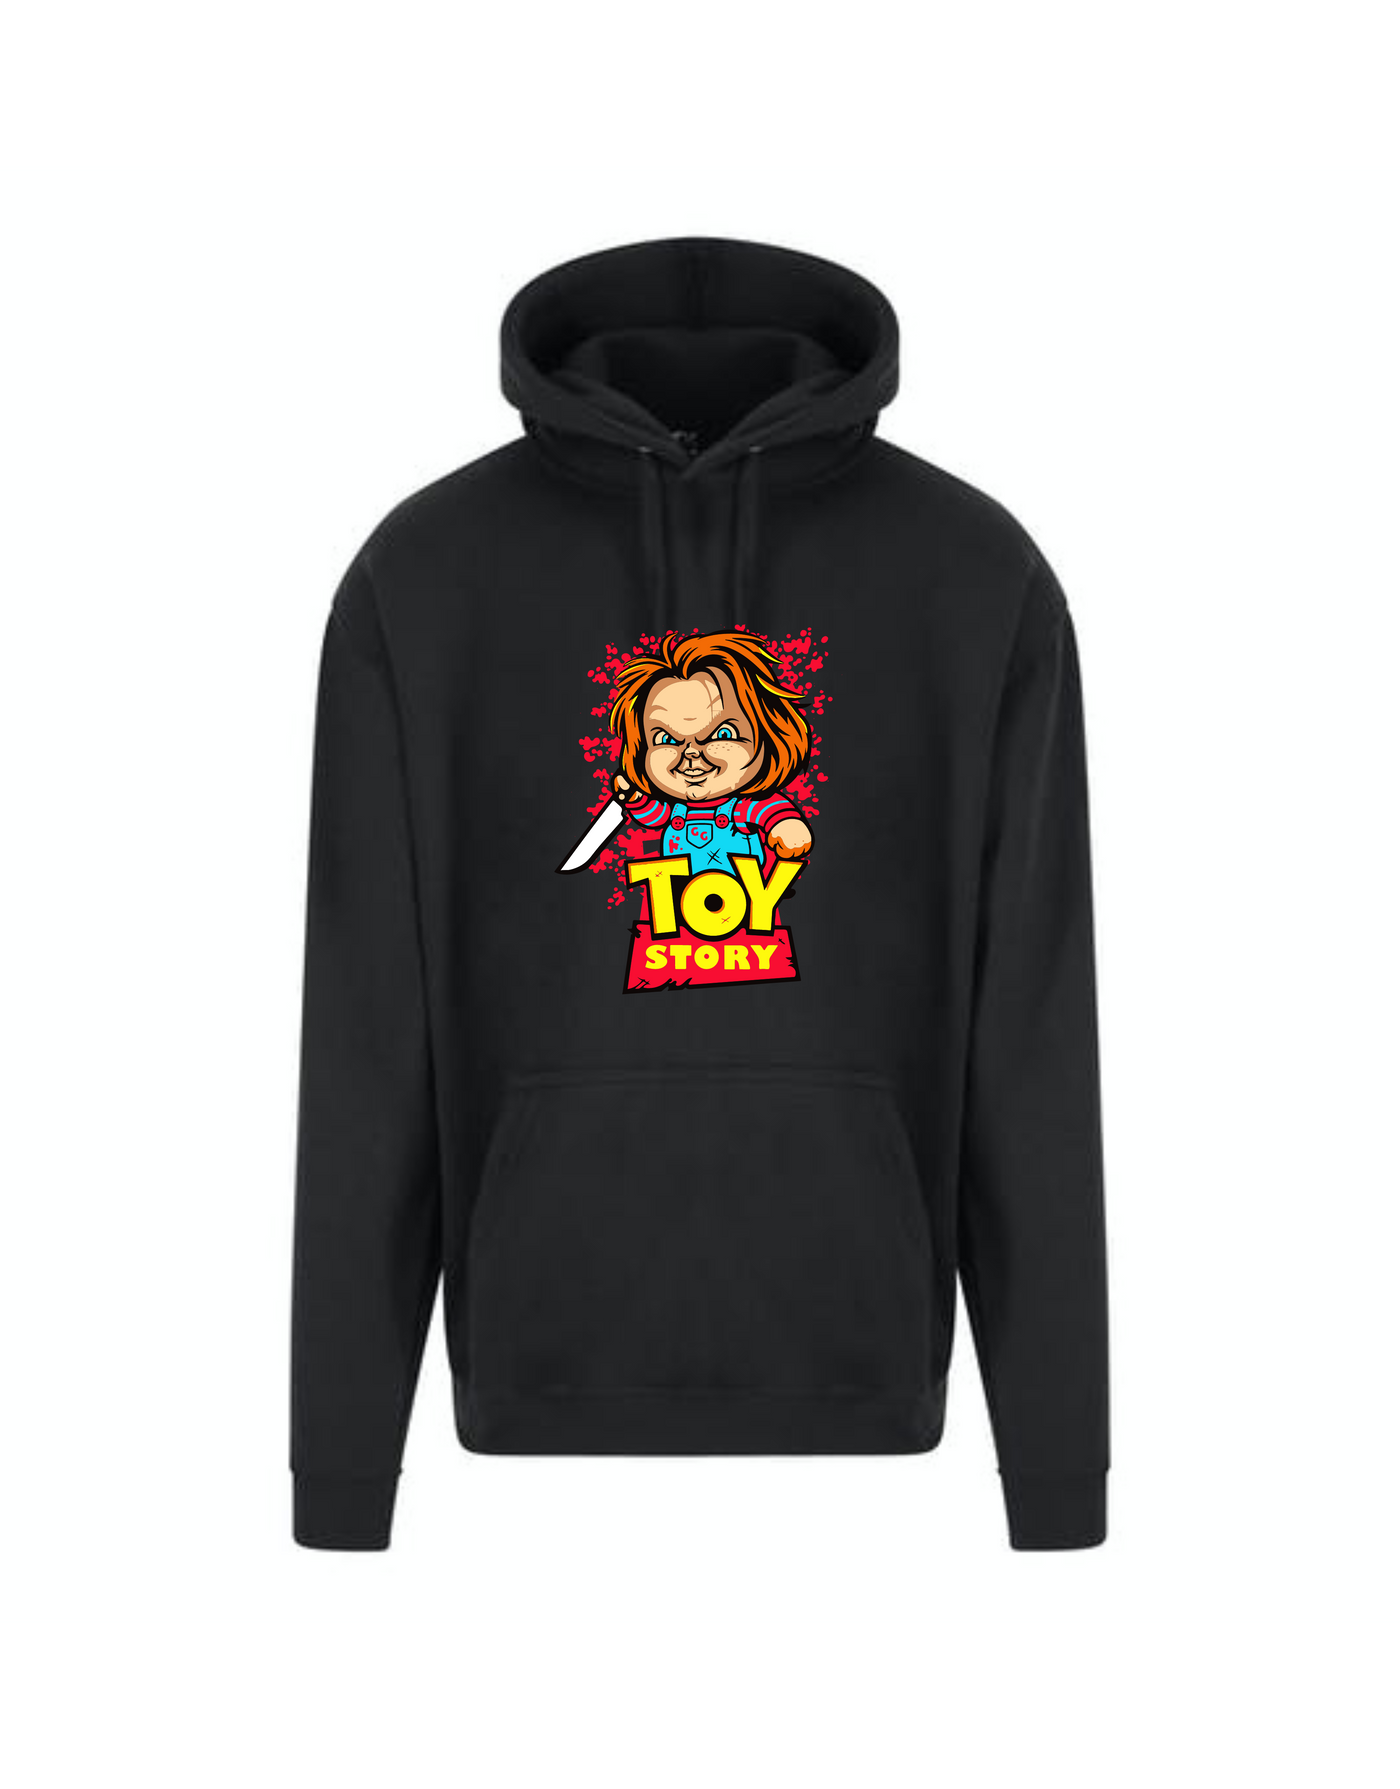 Chucky "Toy Story" Unisex Hoodie